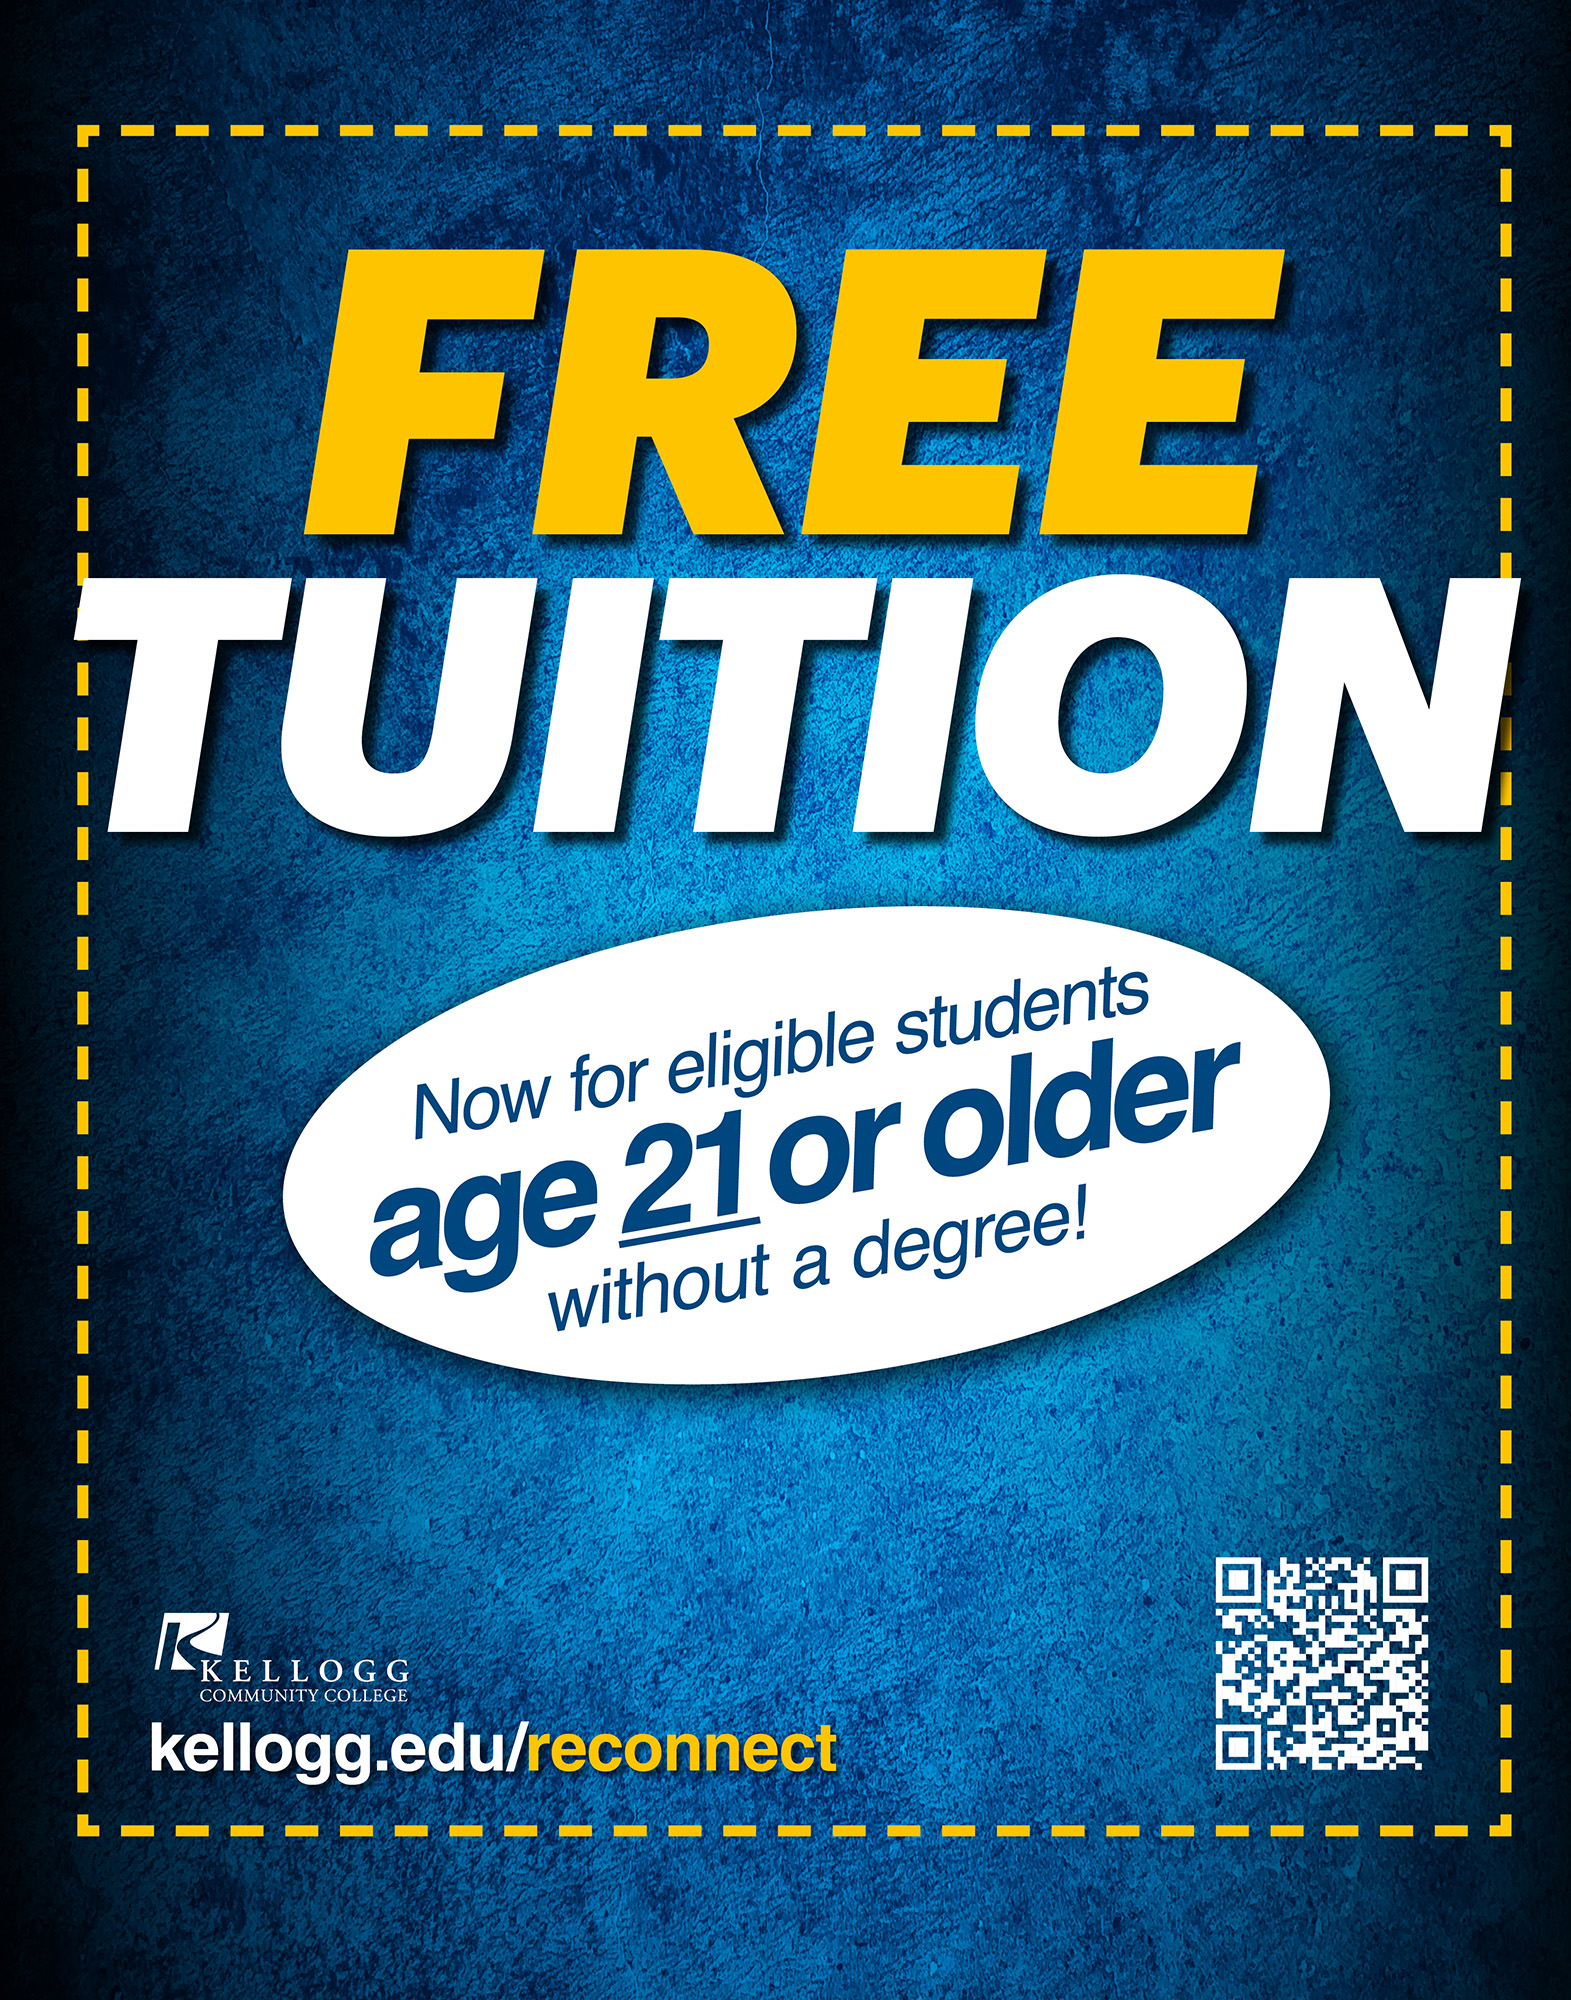 A text graphic that reads, "Free tuition. Now for eligible students age 21 or older without a degree! kellogg.edu/reconnect."